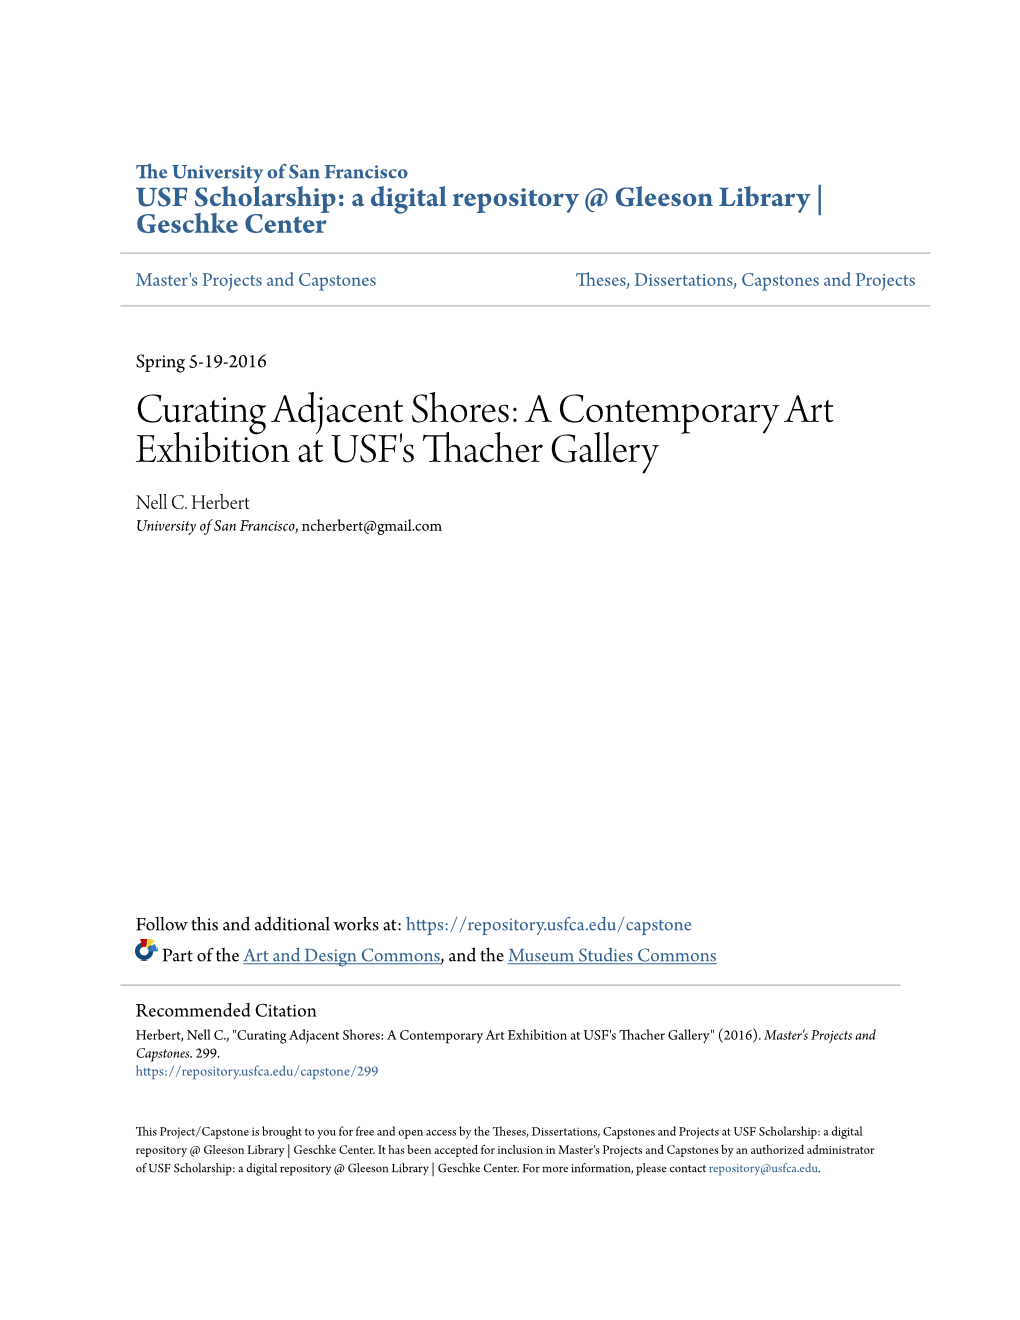 A Contemporary Art Exhibition at USF's Thacher Gallery Nell C